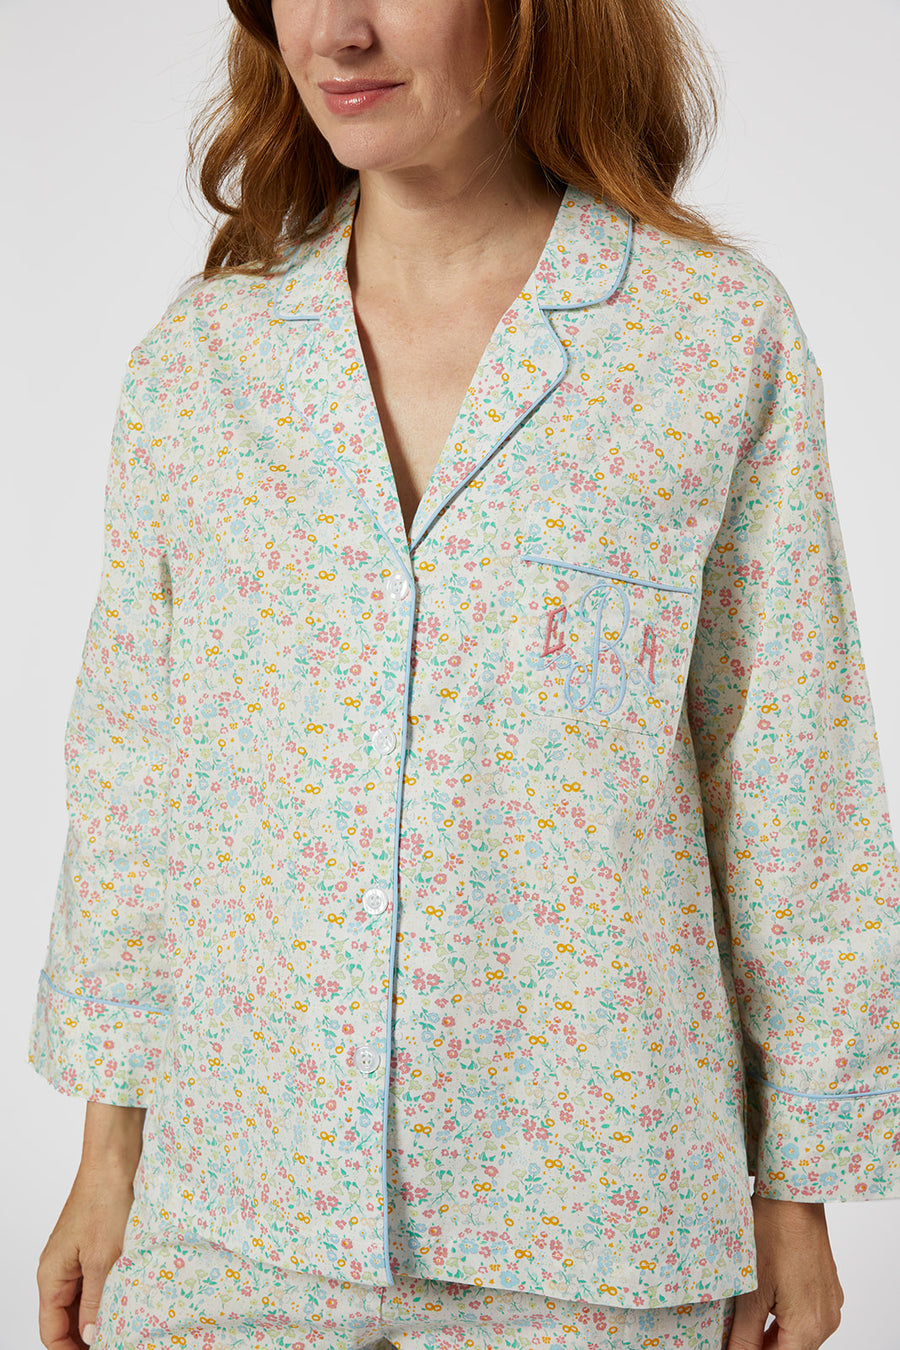 CLASSIC COTTON PAJAMAS IN GARDEN PARTY FLORAL